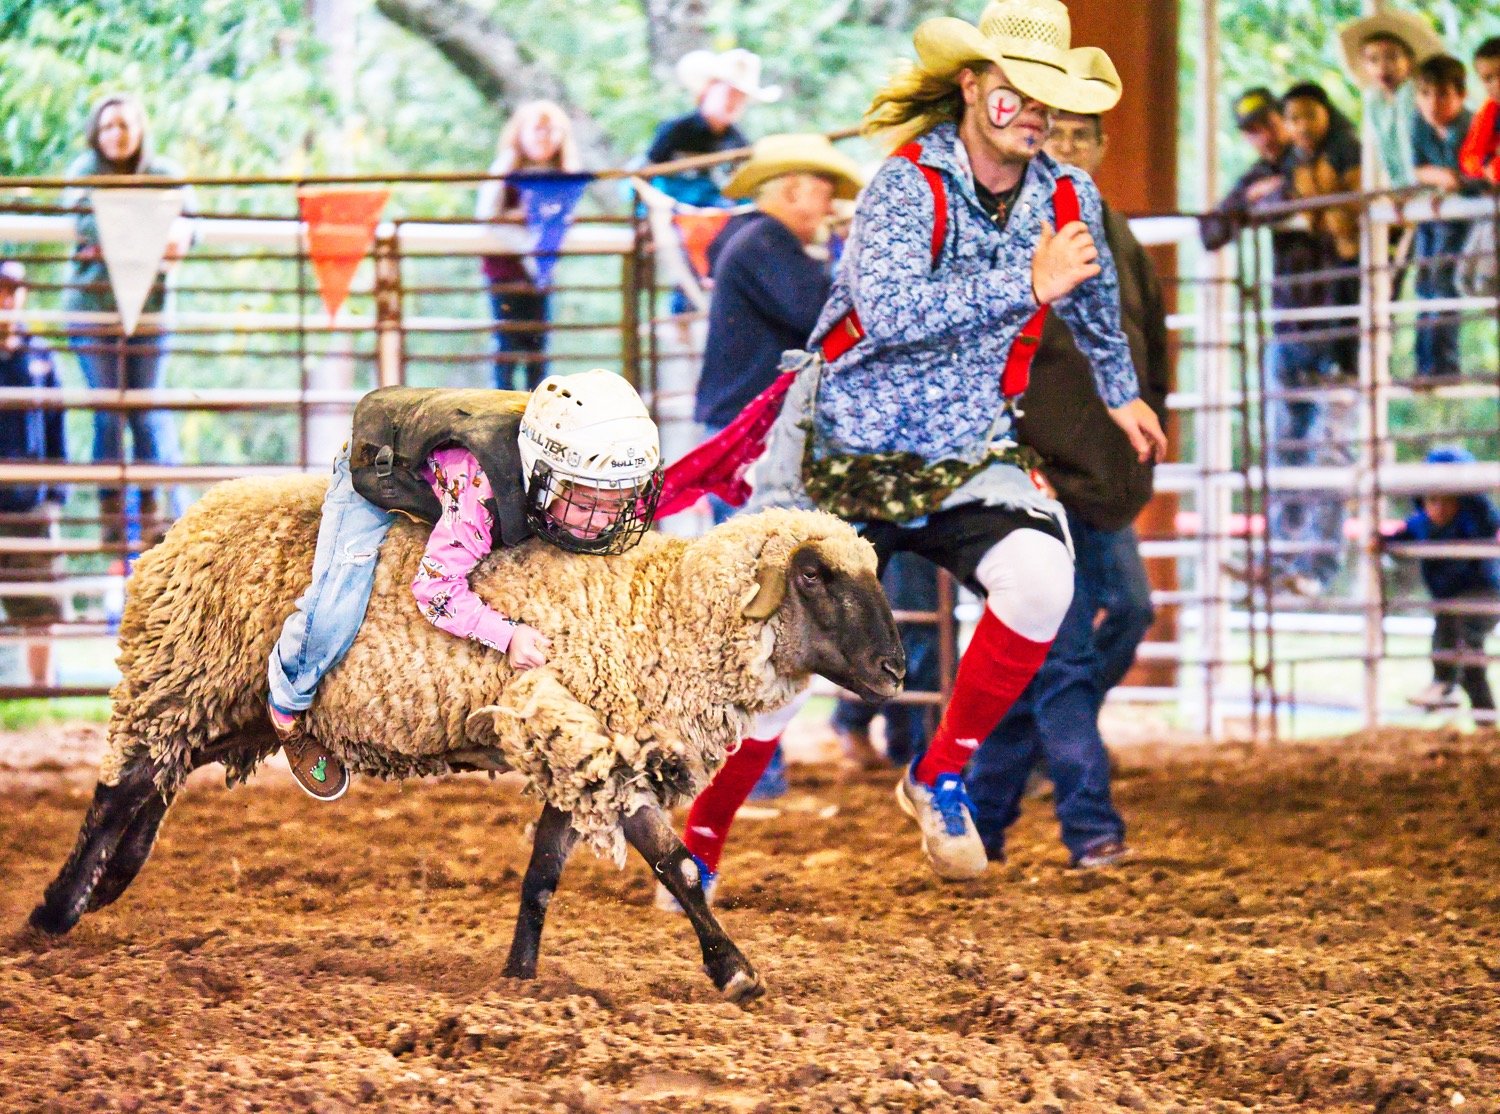 Sheepishness kept few children away from the opportunity to get a taste of the rodeo life, if only for a few seconds, during the mutton busting' competition Friday evening. [see more busters]